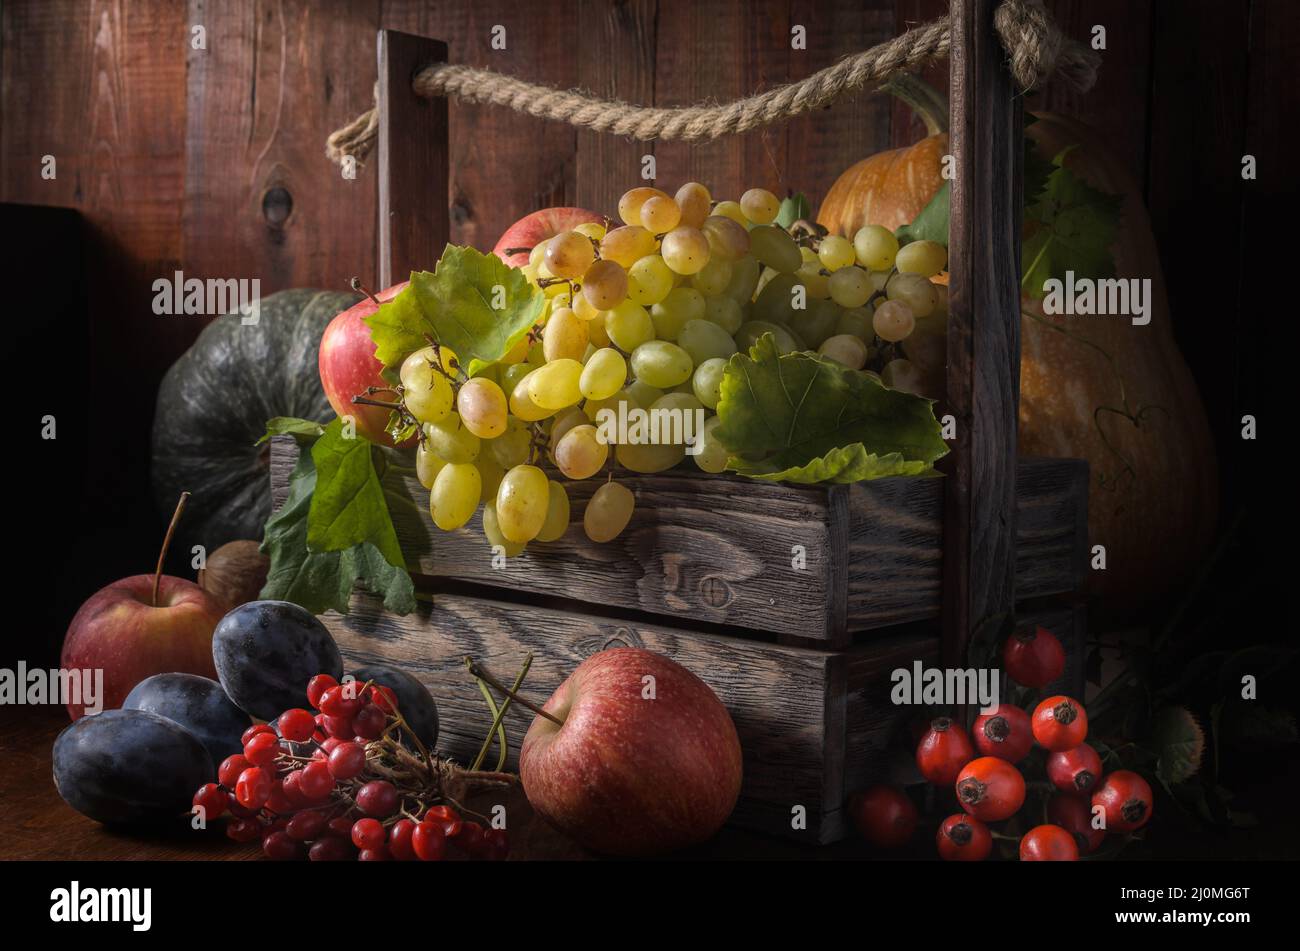 Grapes and other fruits on a dark wooden background in a rustic style Stock Photo